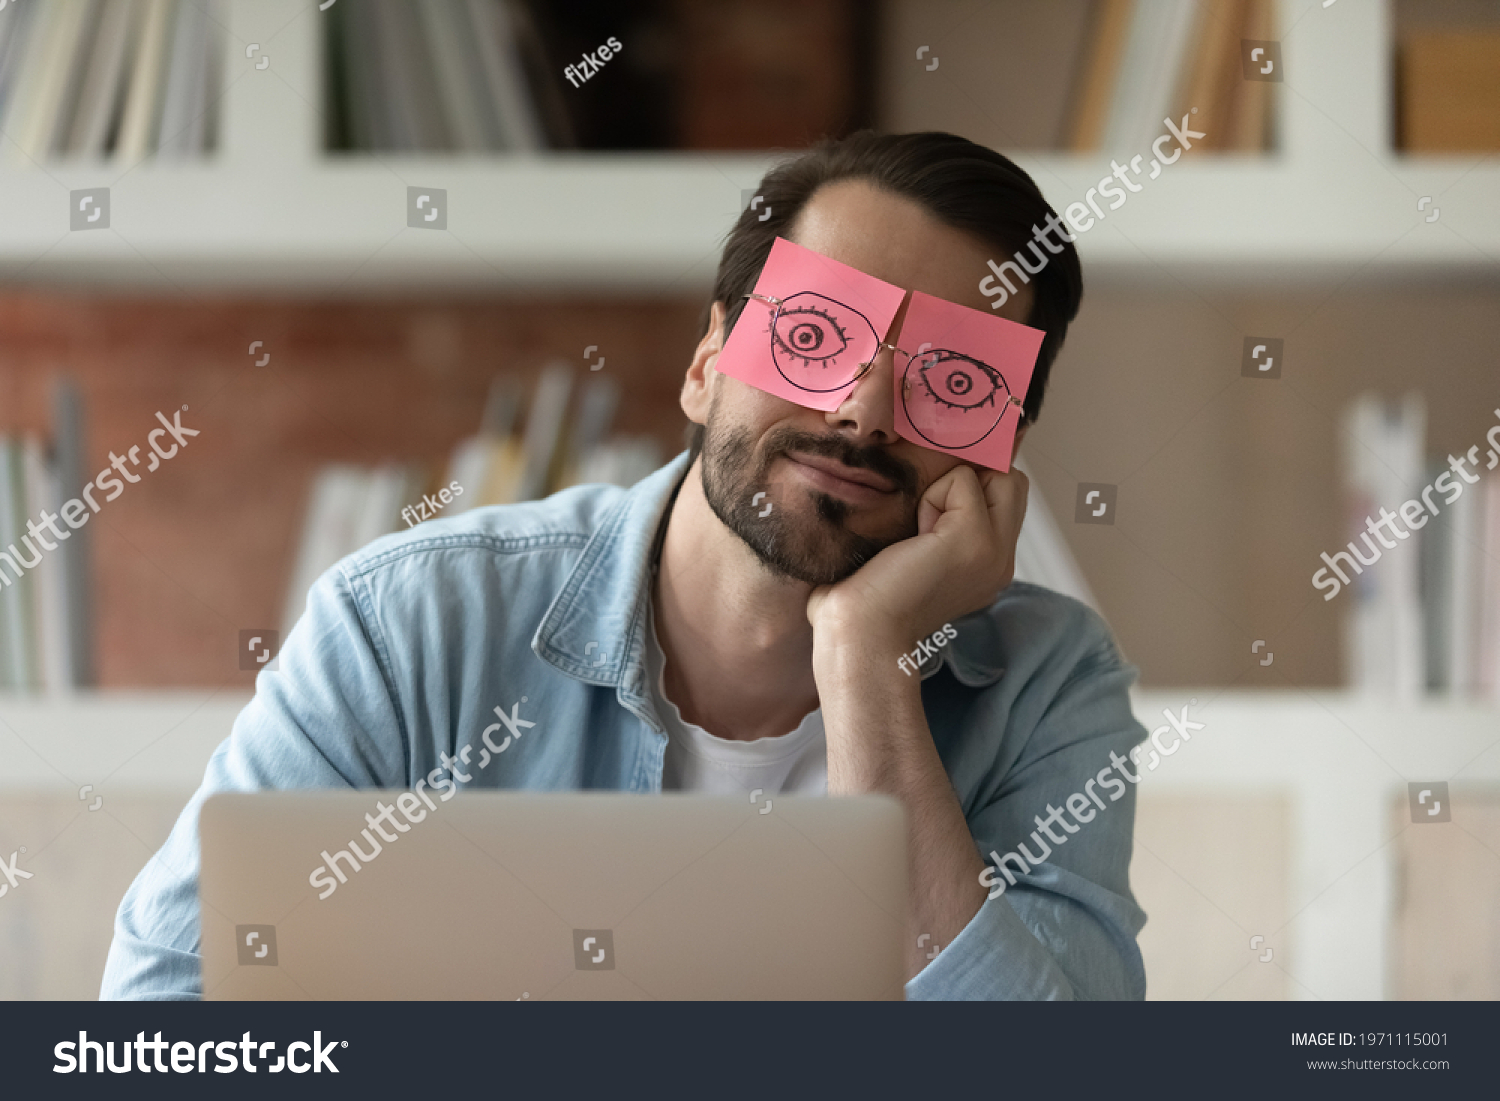 Close up tired businessman with stickers on face sleeping, drawn eyes on adhesive papers, sitting at work desk in office, unproductive lazy young male dozing, working on difficult project, fatigue #1971115001